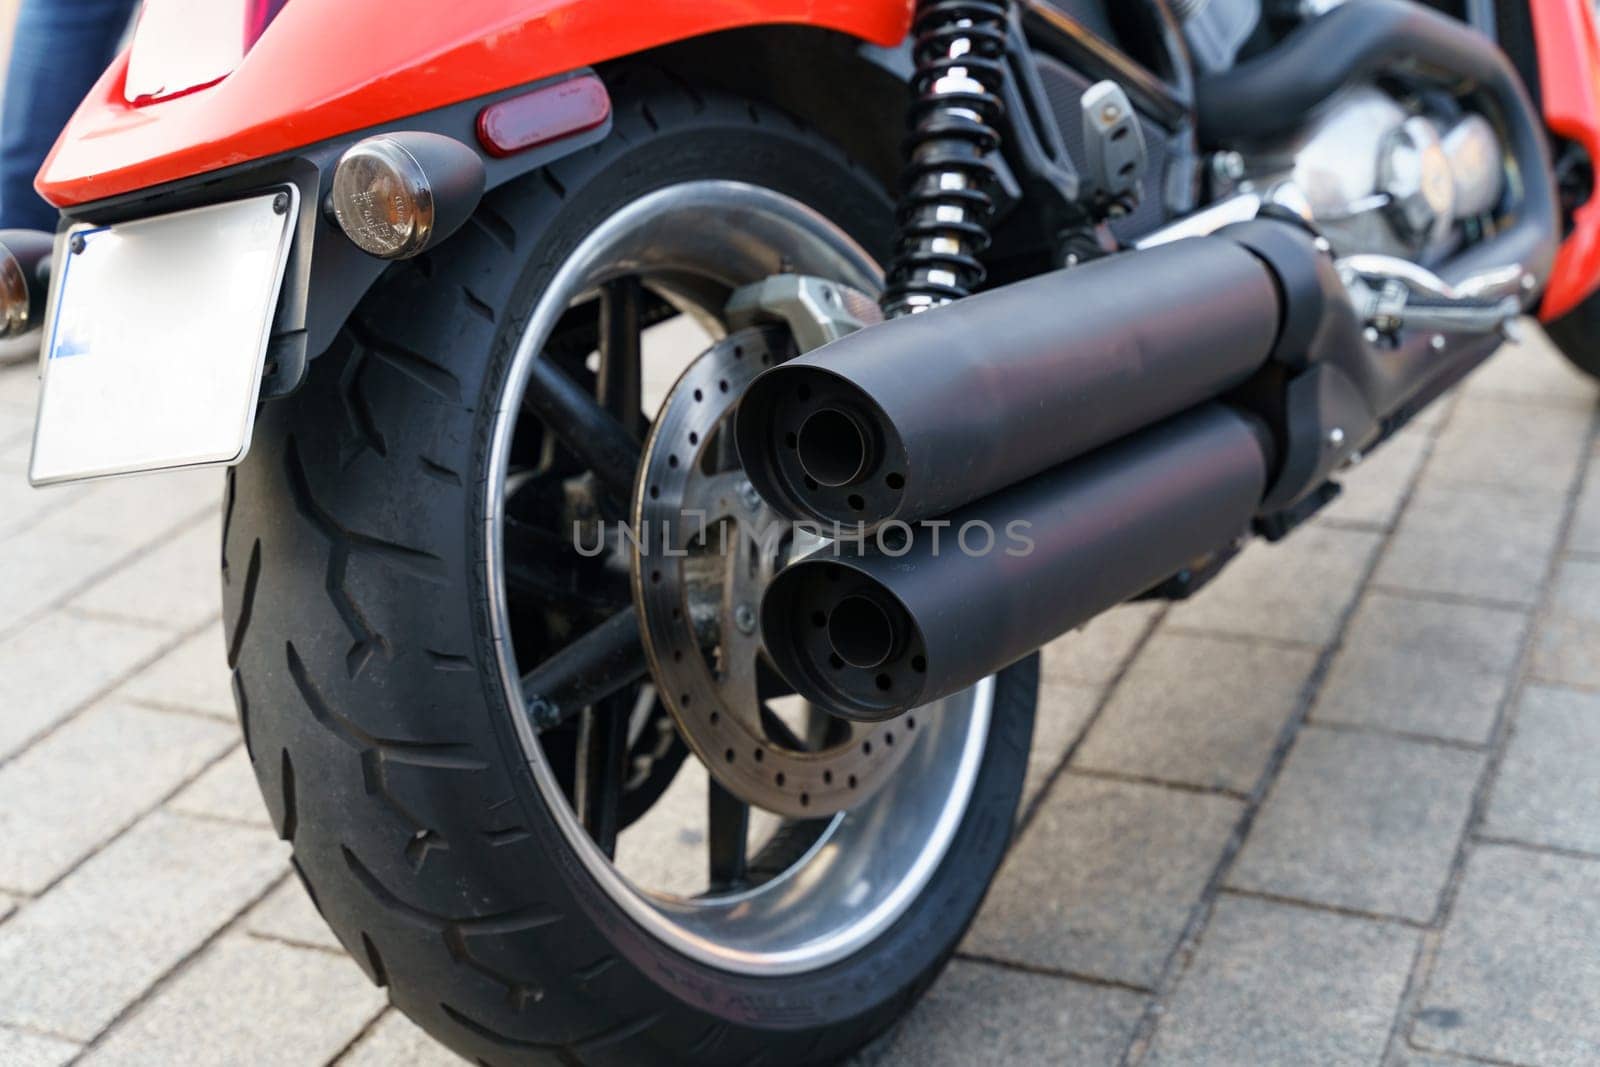 A Harley Davidson motorcycle stands in a parking lot, detailed rear view. by Sd28DimoN_1976